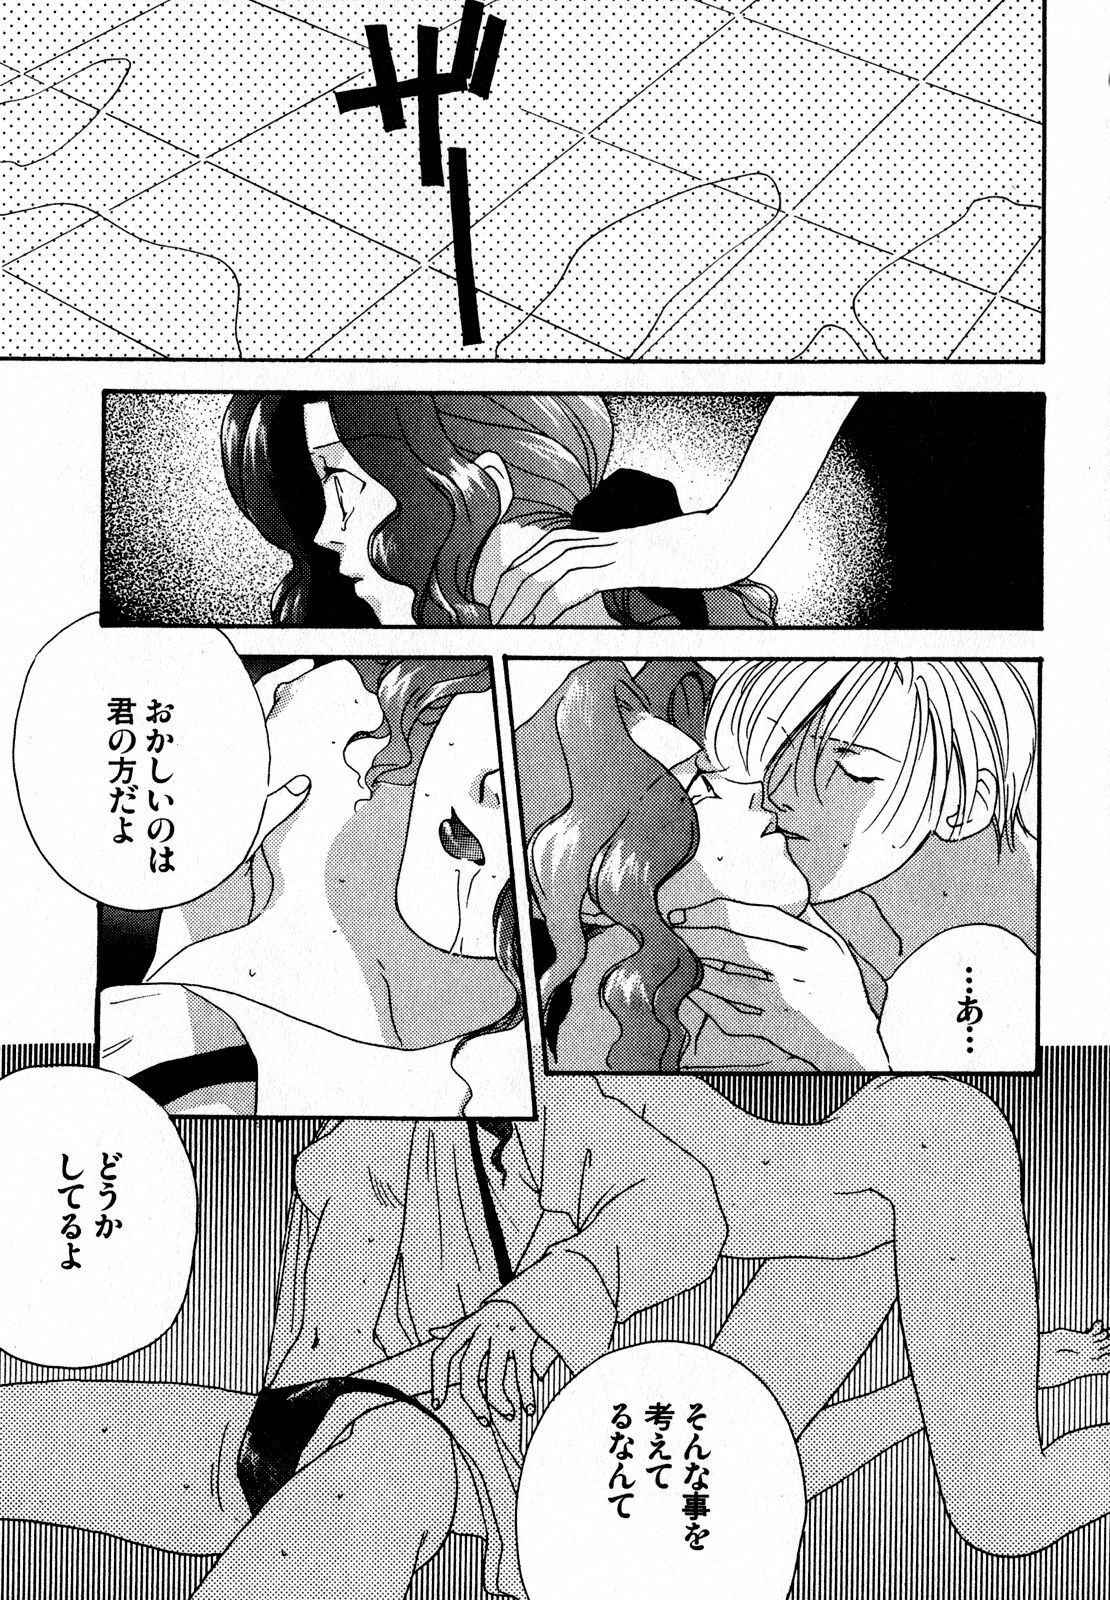 [Anthology] Lunatic Party 7 (Sailor Moon) page 14 full